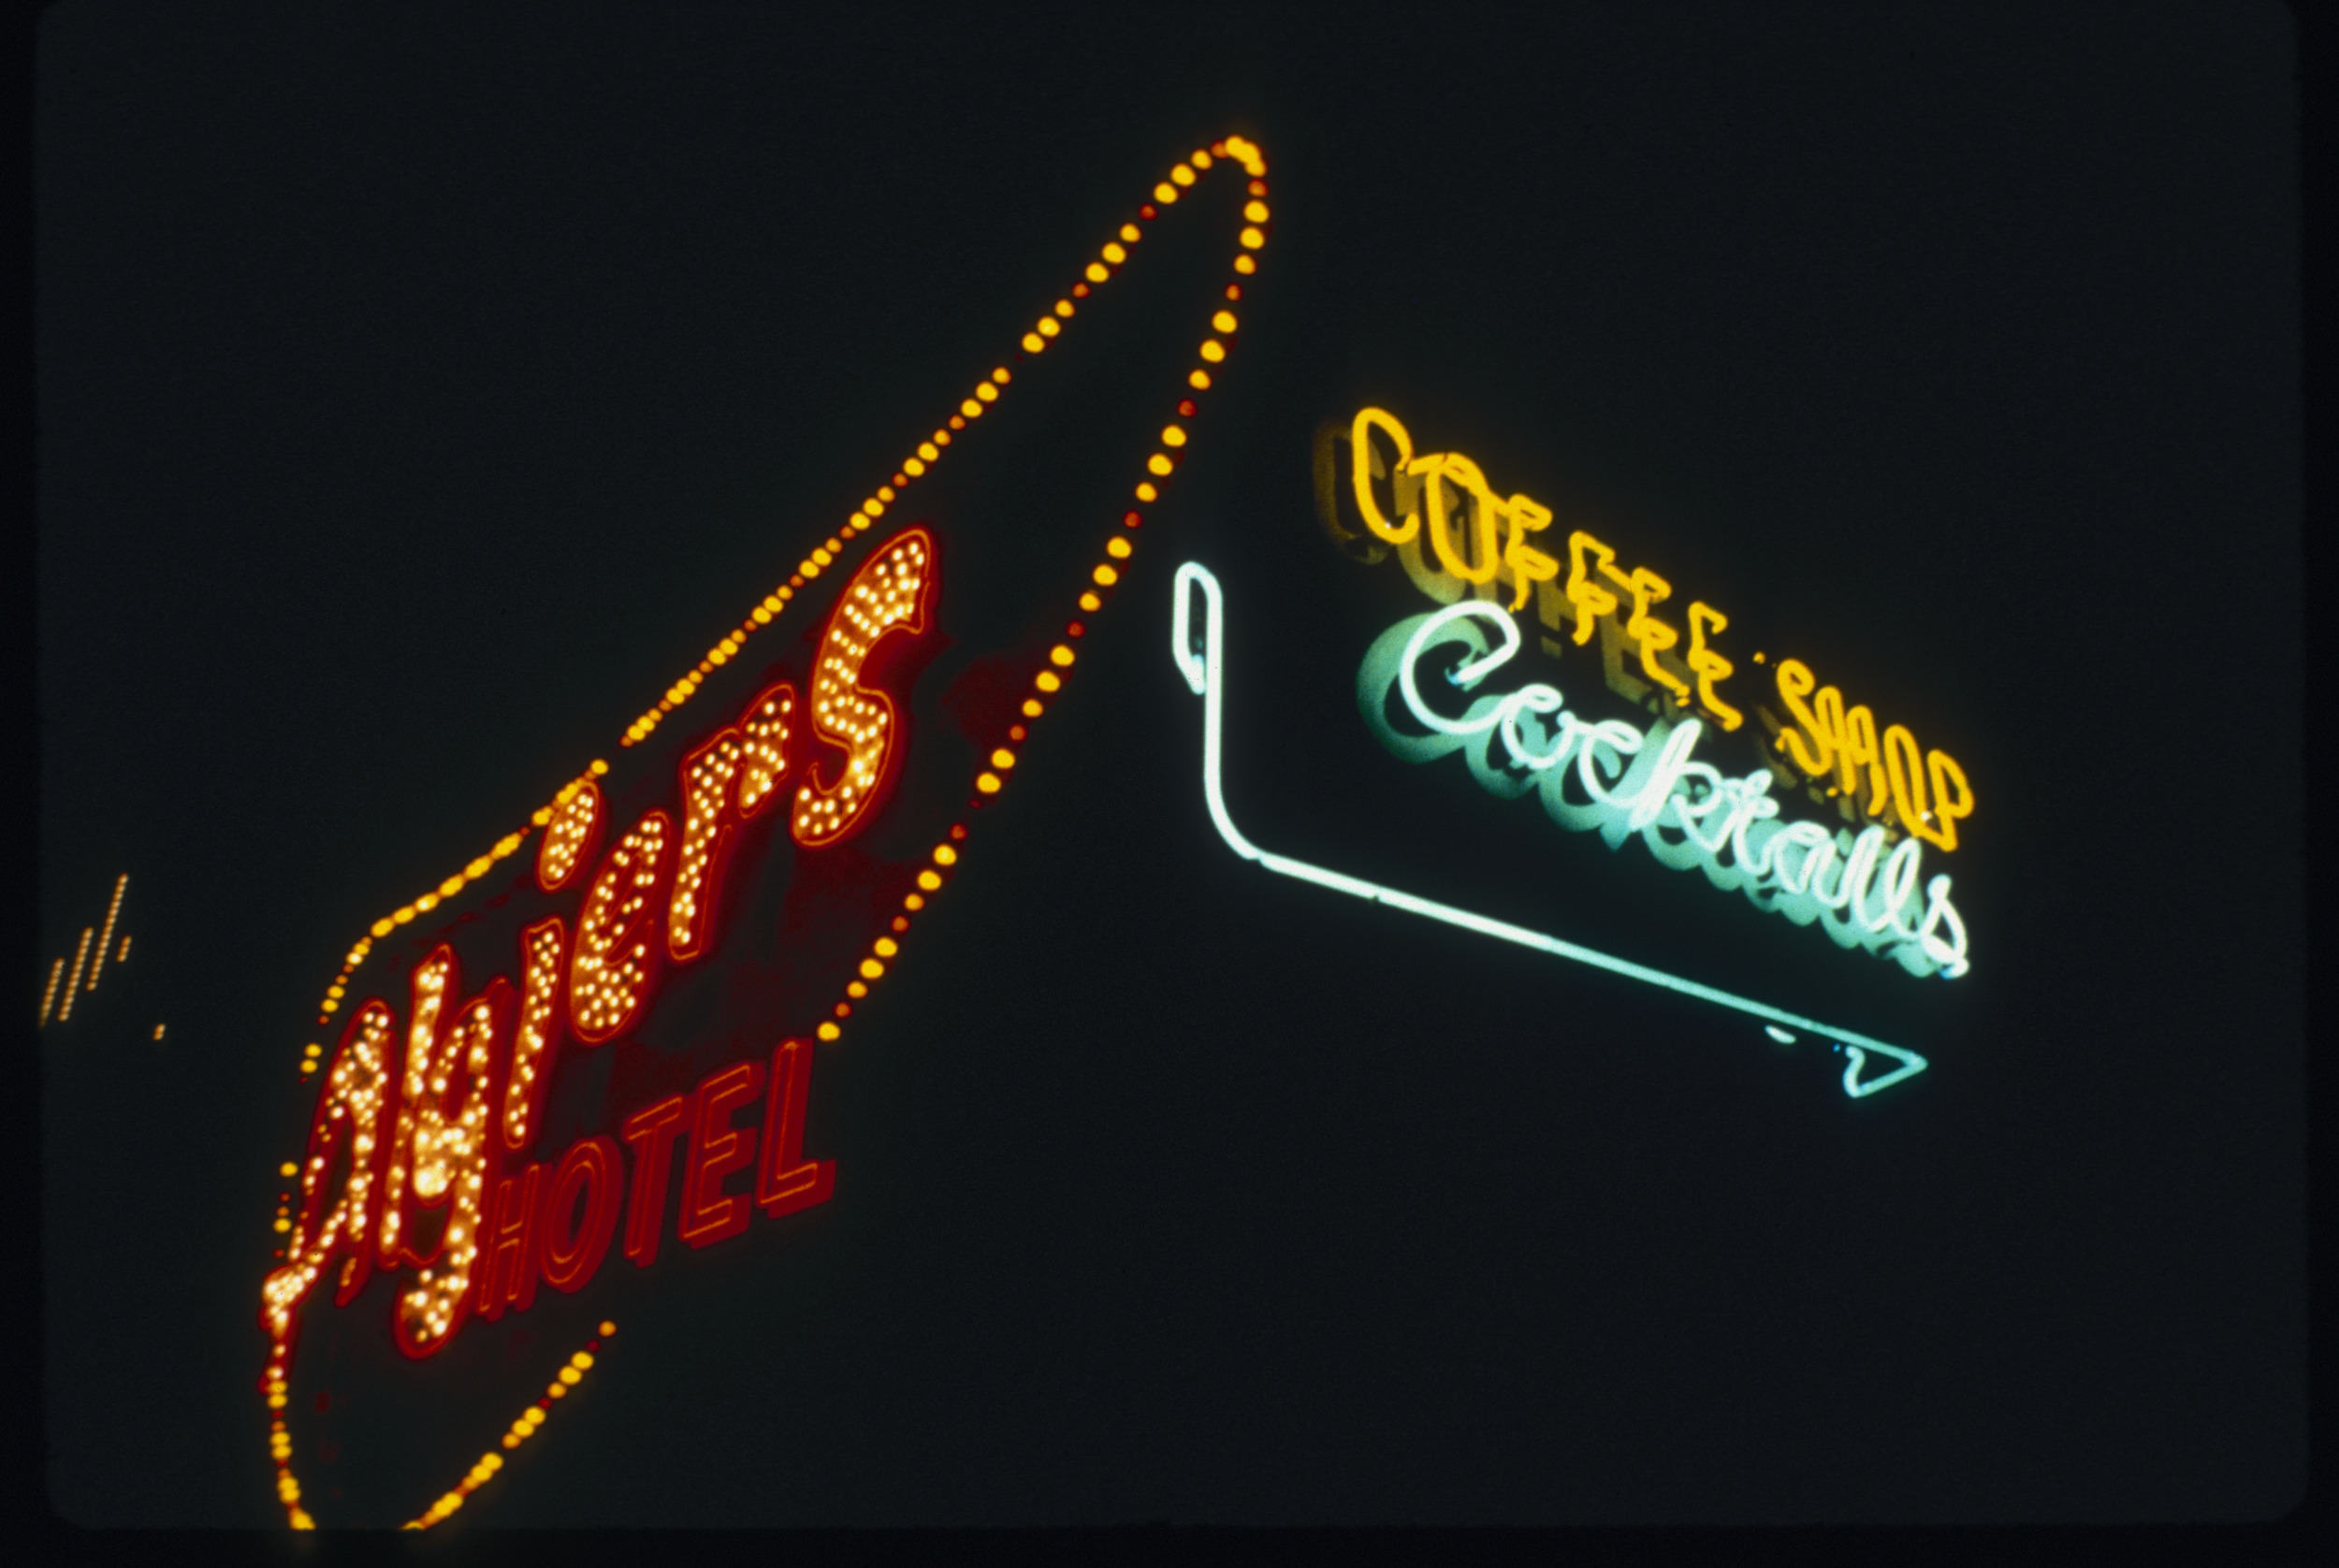 Slide of the neon sign for the Algiers Hotel, Las Vegas, circa 1979